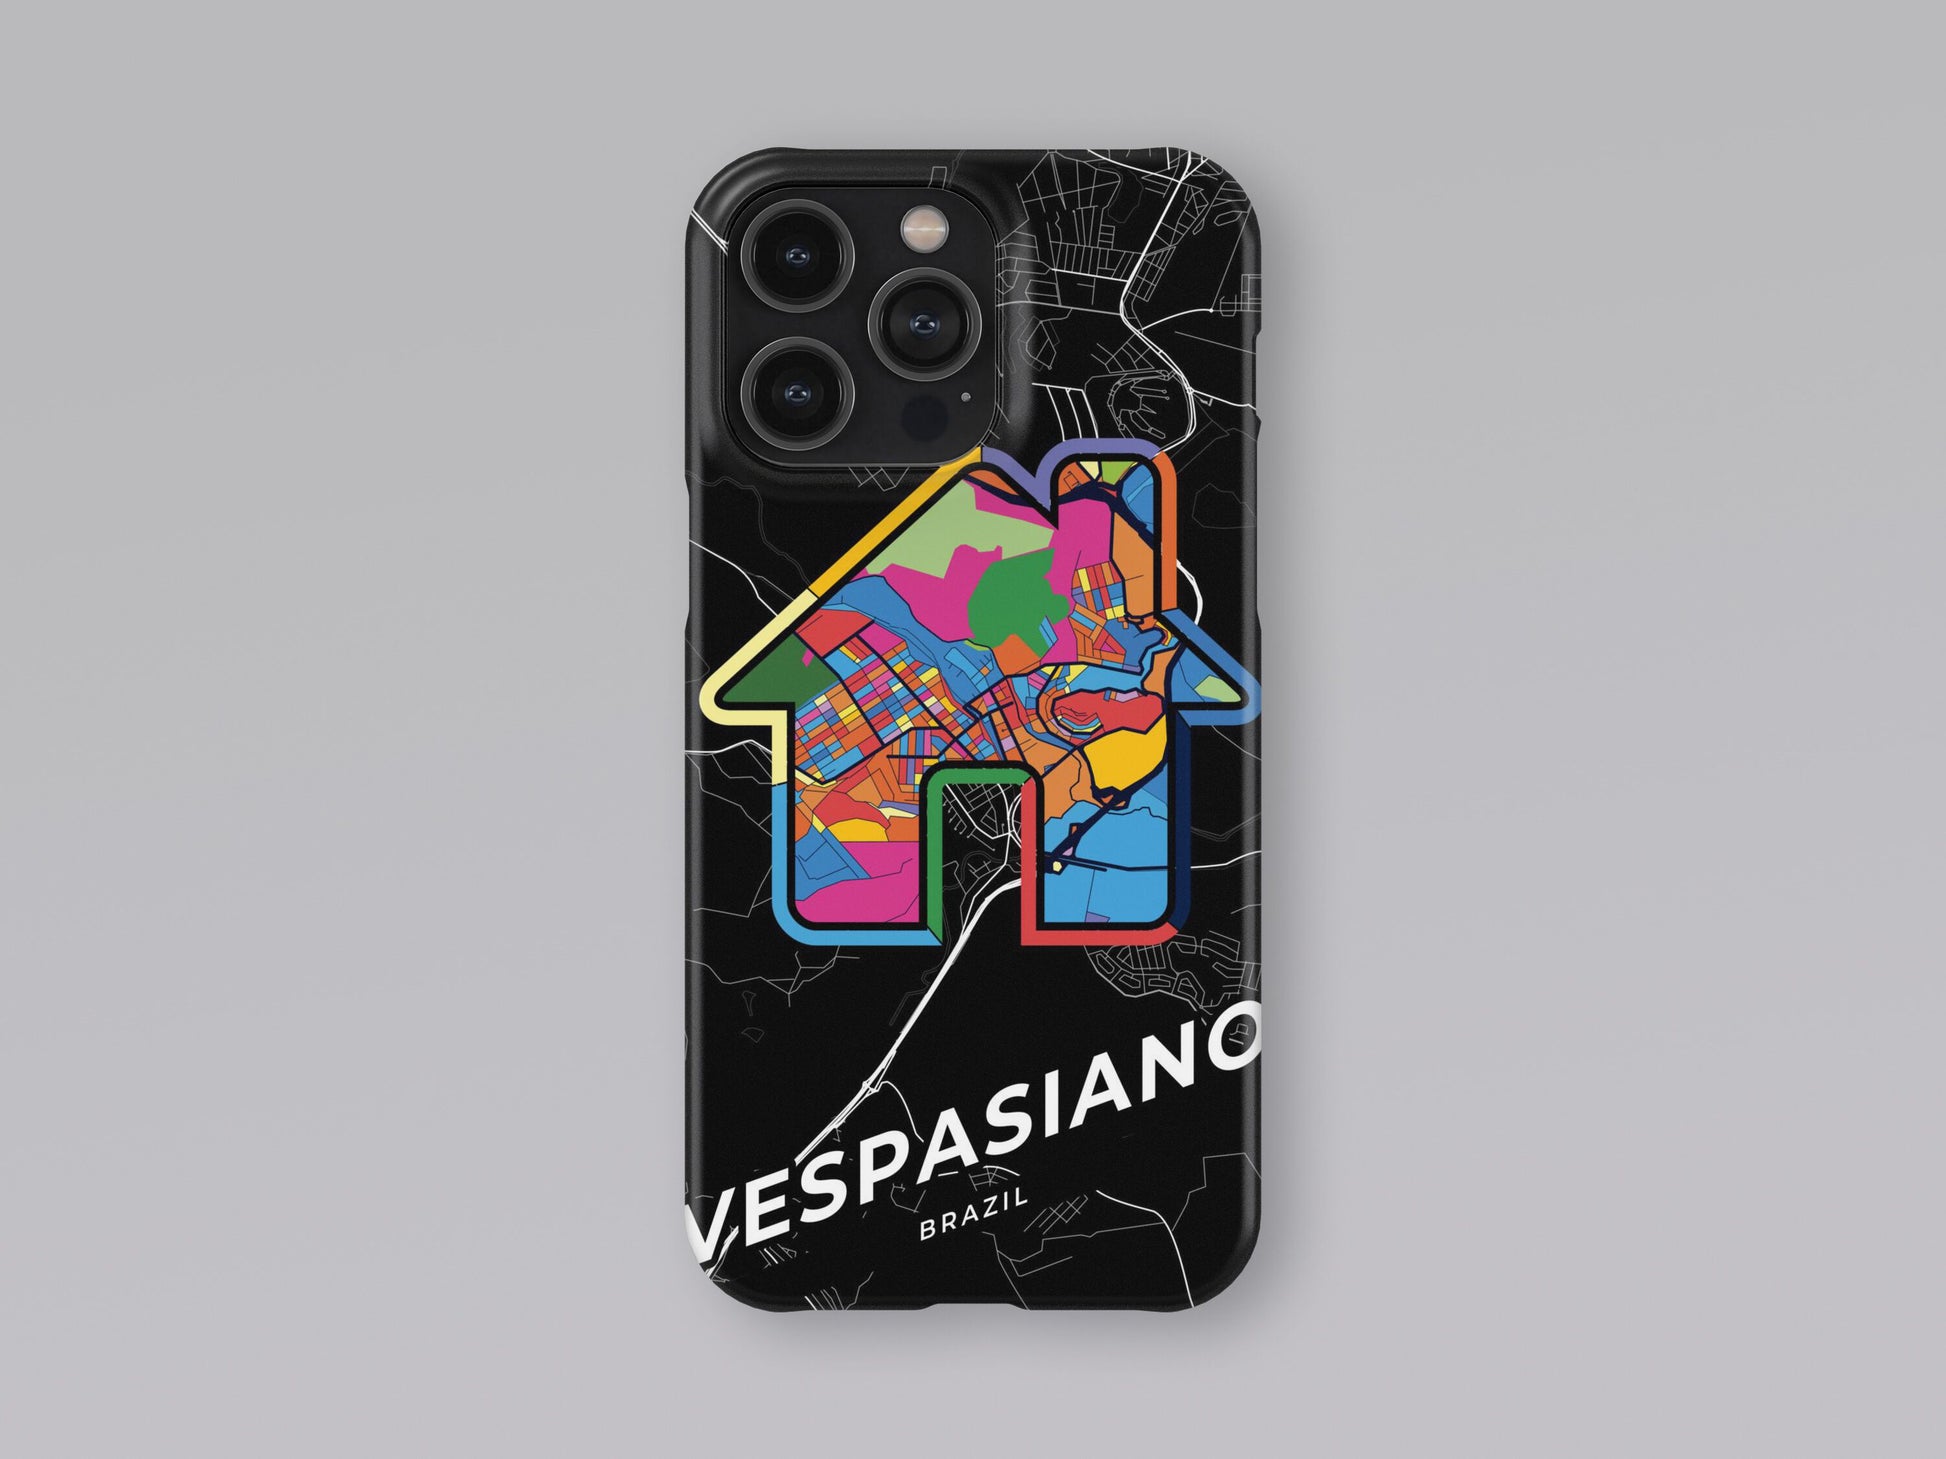 Vespasiano Brazil slim phone case with colorful icon. Birthday, wedding or housewarming gift. Couple match cases. 3